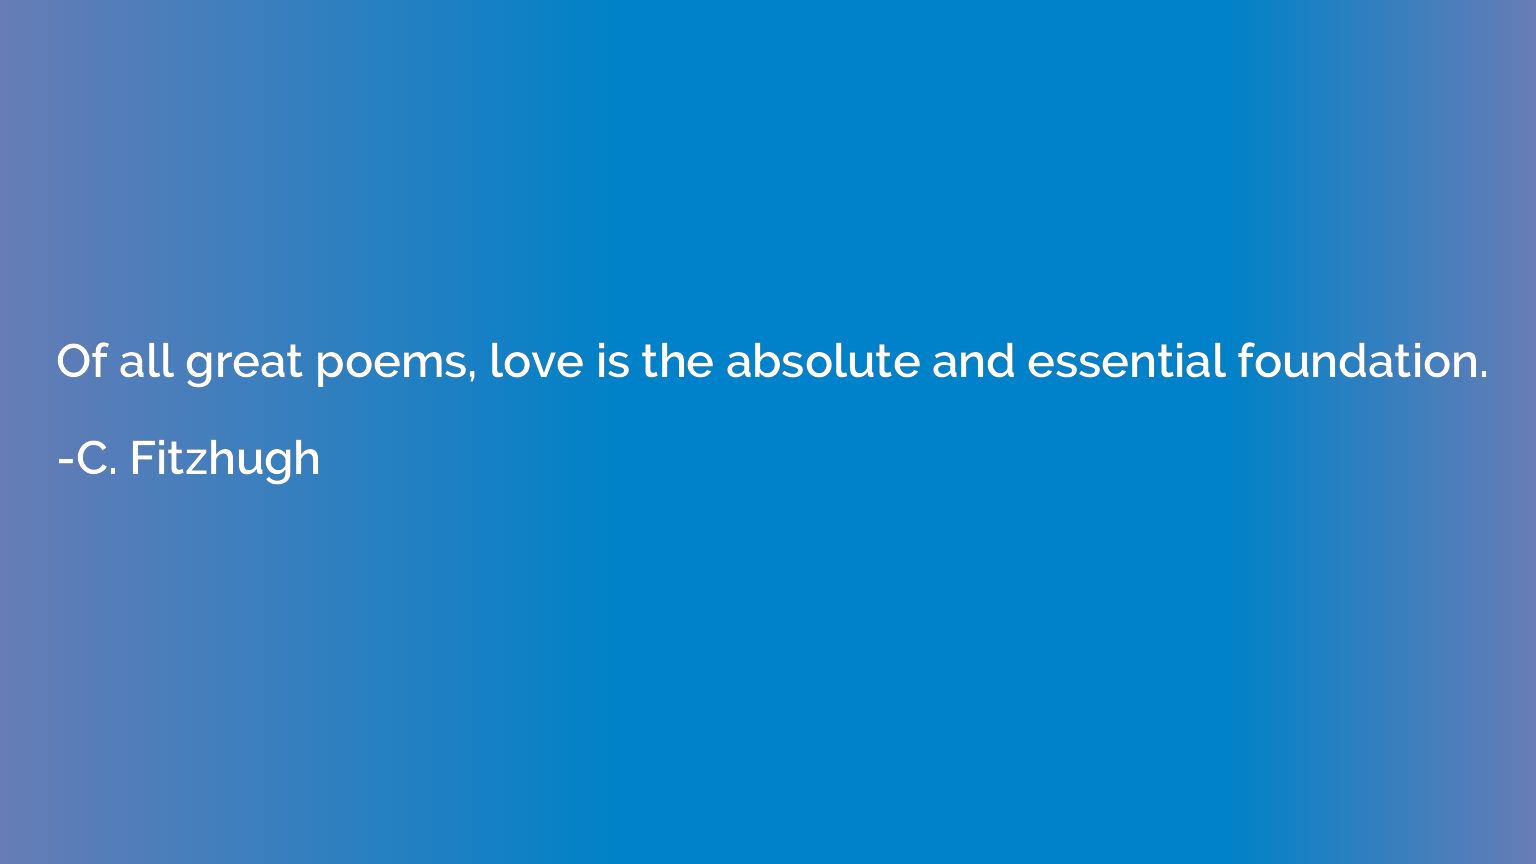 Of all great poems, love is the absolute and essential found